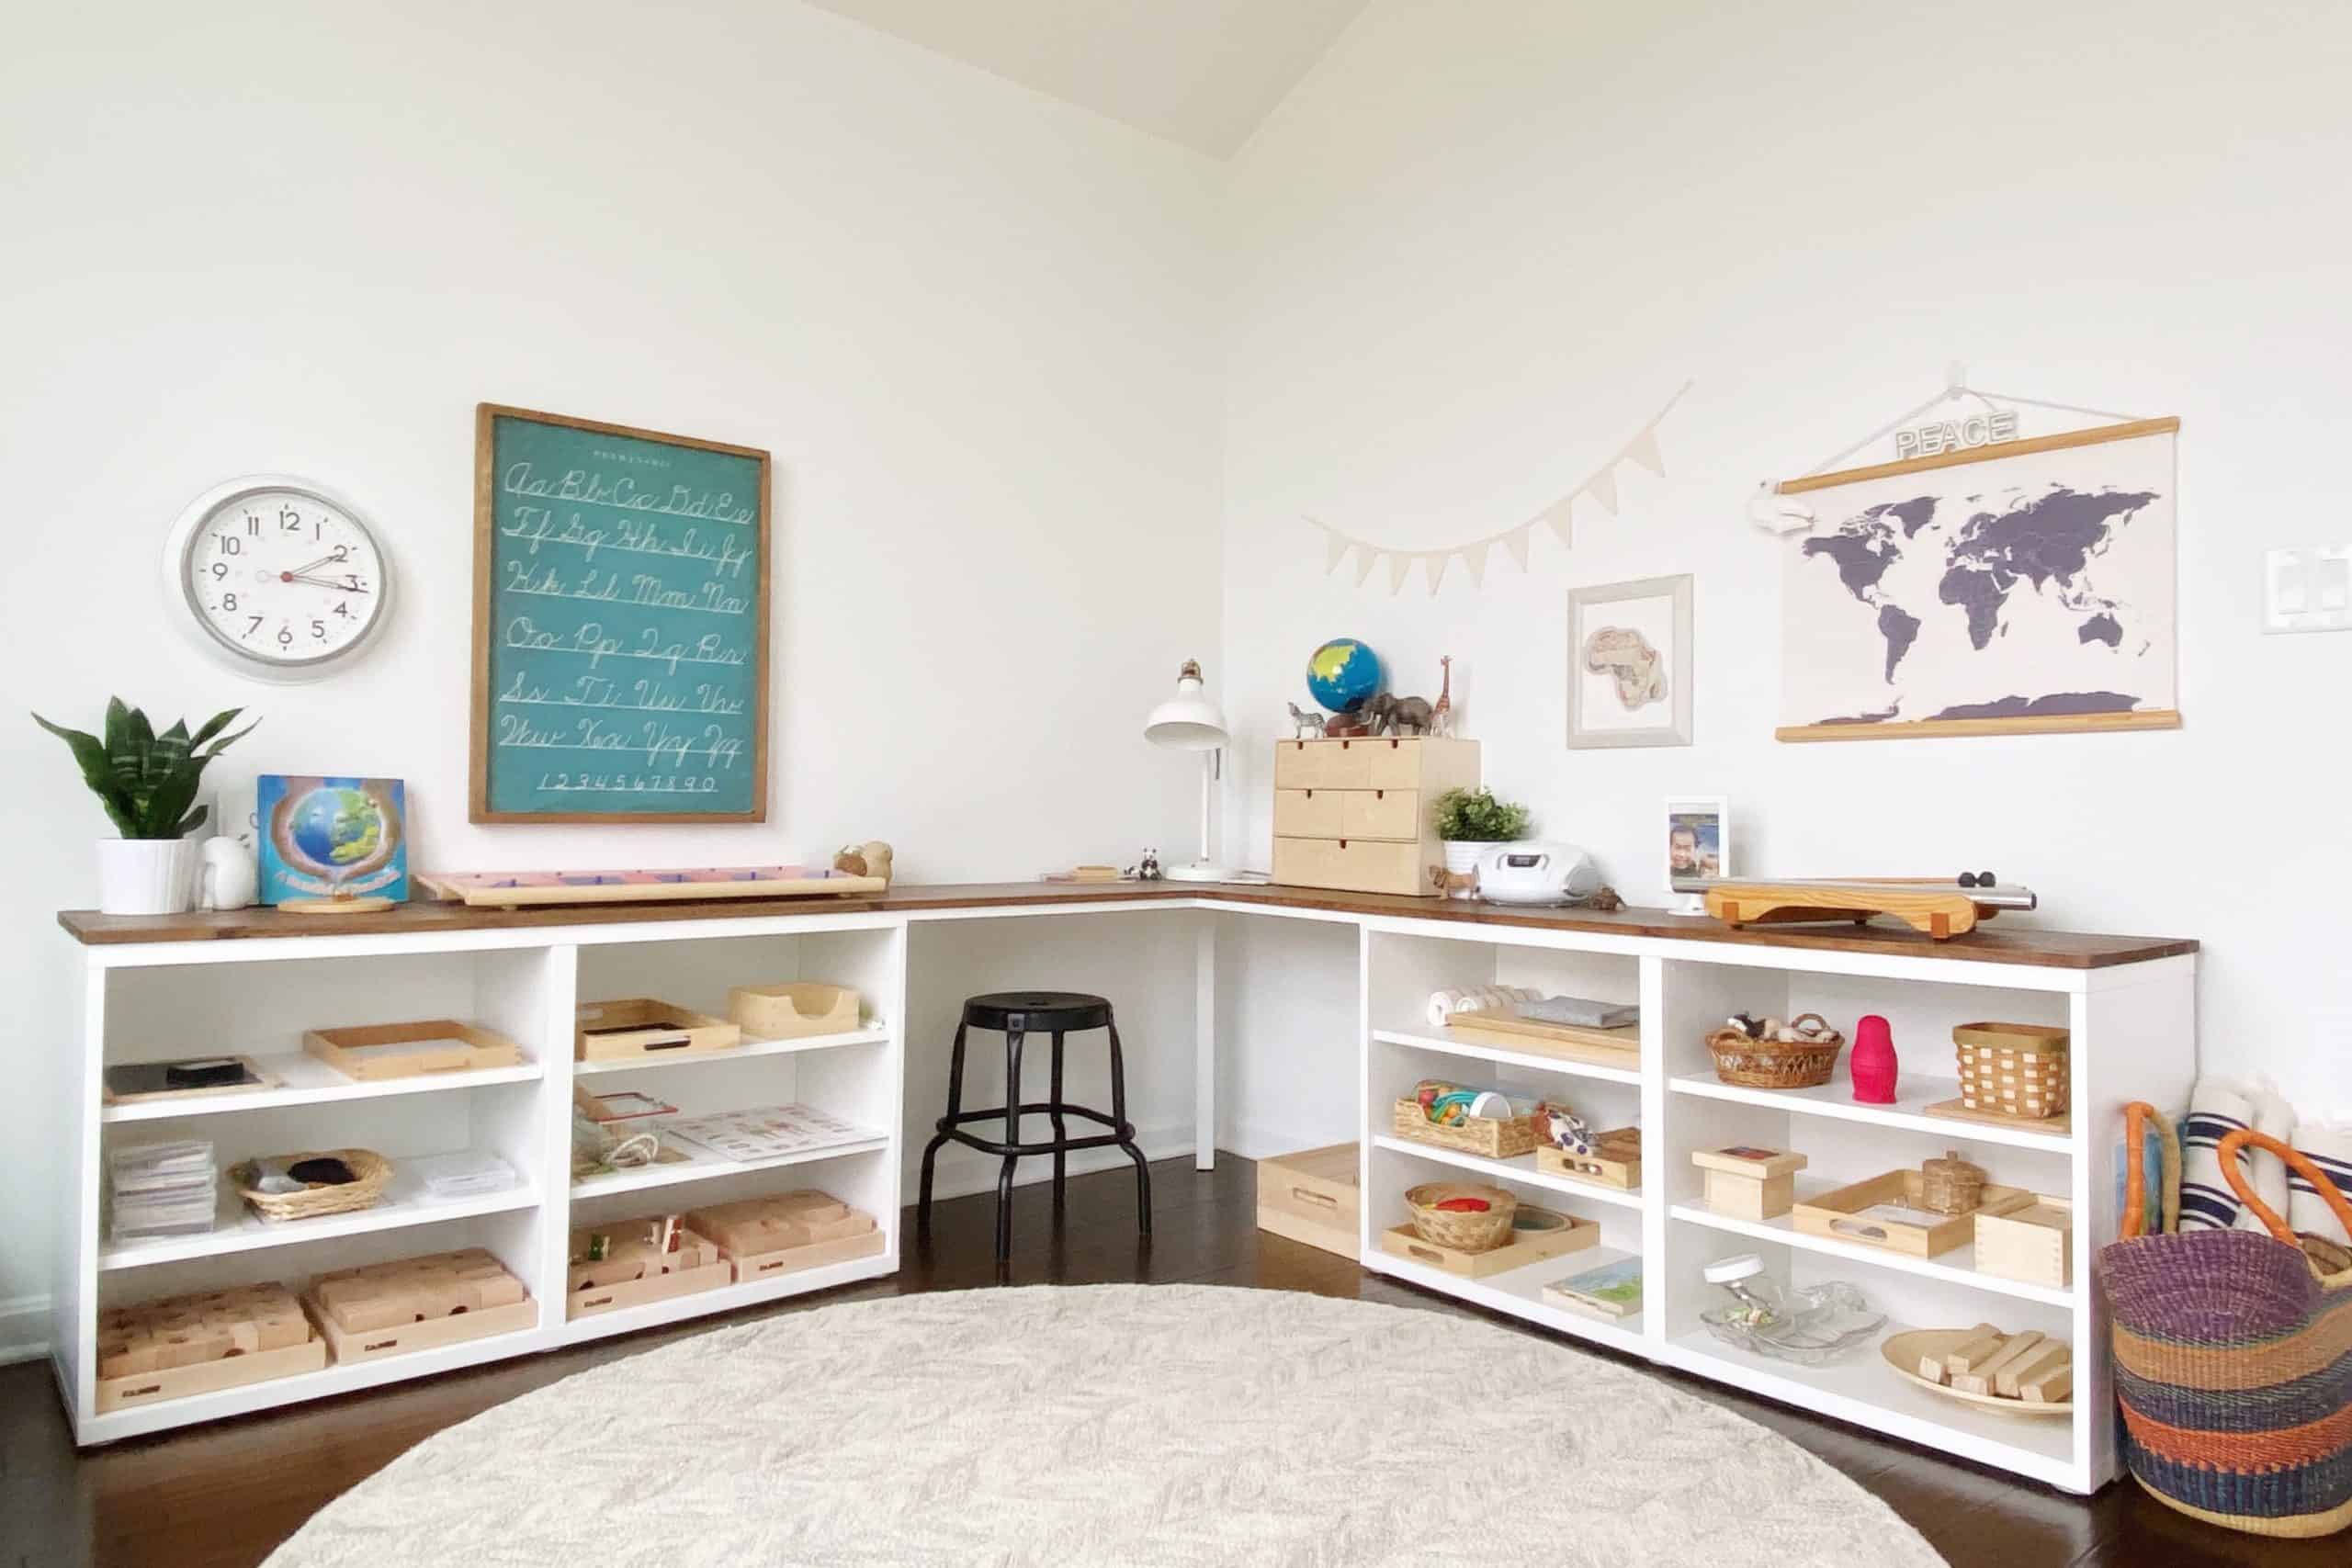 Tour a Montessori-inspired schoolroom + playroom for multiple children at www.freeandunfettered.com. You can also download a free guide to help you design your own prepared environment for your children at home. #montessori #designingspacesforchildren #preparedenvironment #montessoriathome #homeschoolroom #homeschooling 